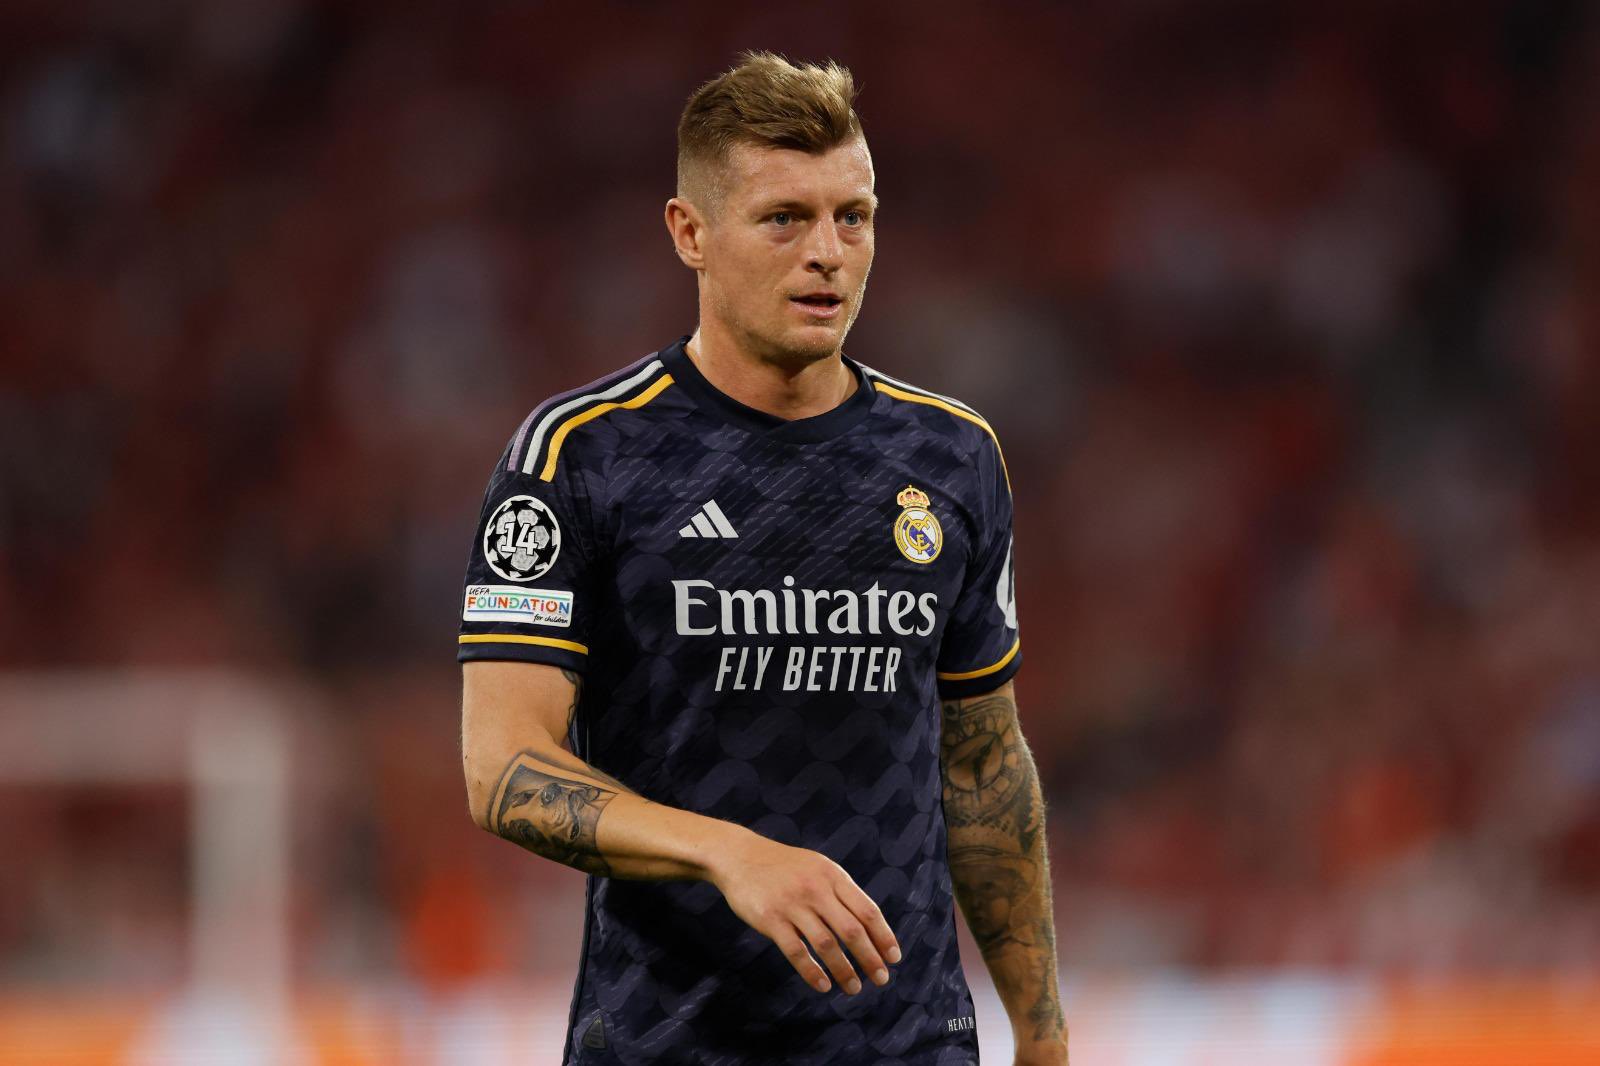 “I’ve found a home here” – Toni Kroos on life at Real Madrid amid talk of possible exit